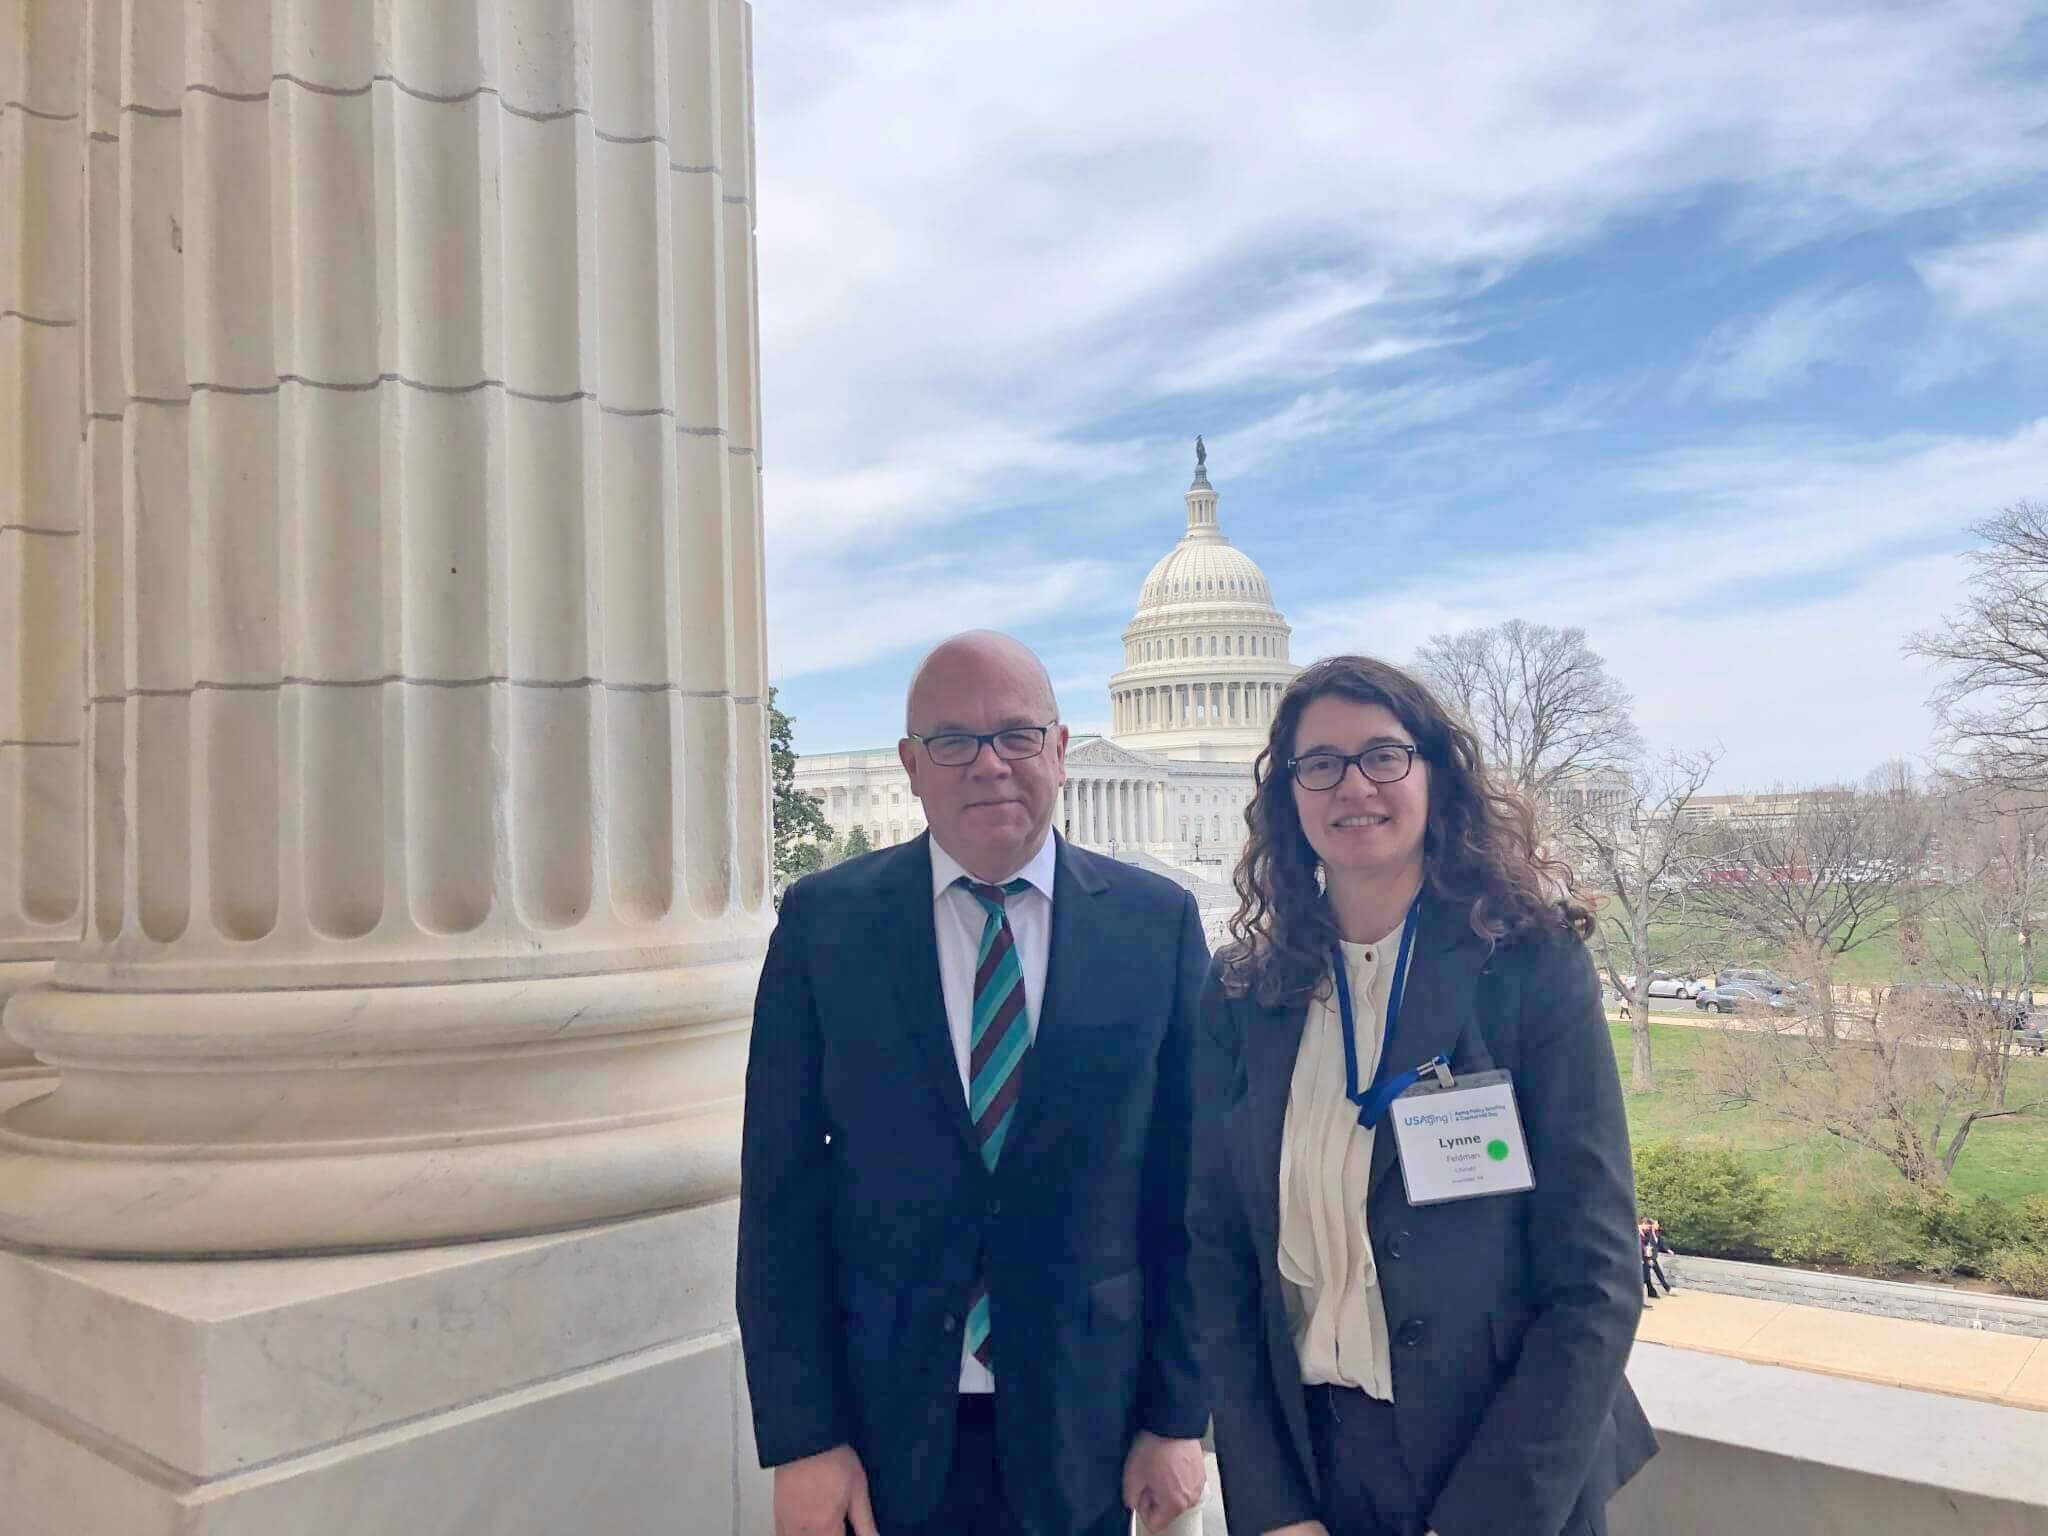 LifePath's Director of Community Services Lynne Feldman with Congressman Jim McGovern in front of the Capitol Building in Washington, DC.